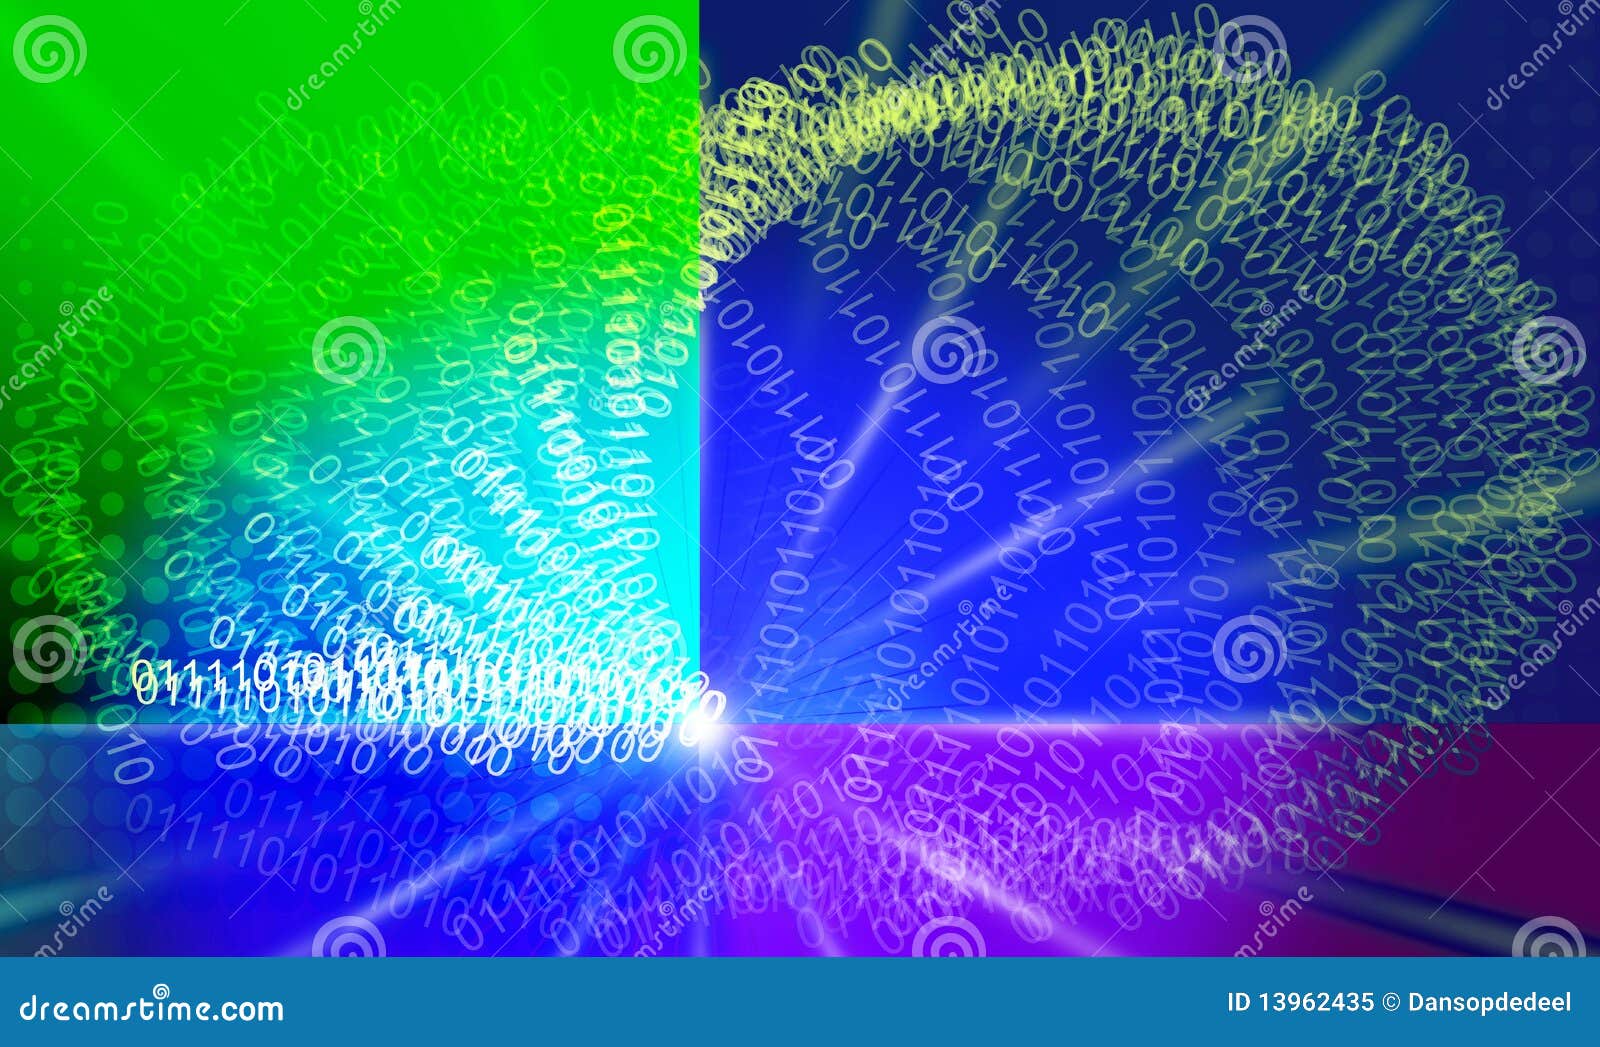  Abstract  Background Composite  Stock Illustration 